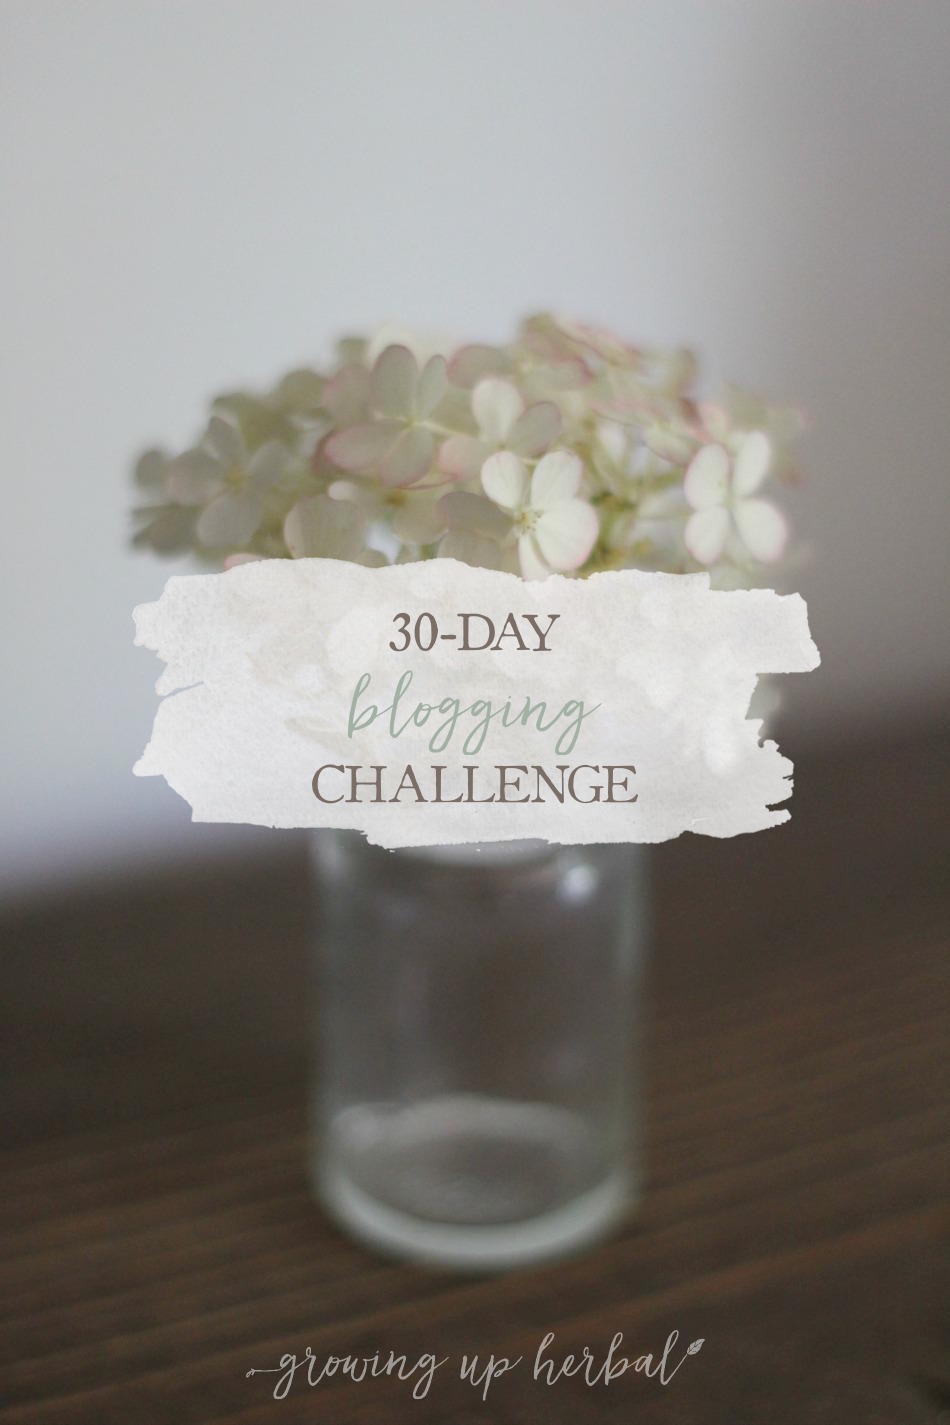 30-Day Blogging Challenge | Growing Up Herbal | I'm doing a 30-day blogging challenge to push myself to write and share more. I hope you'll follow along!